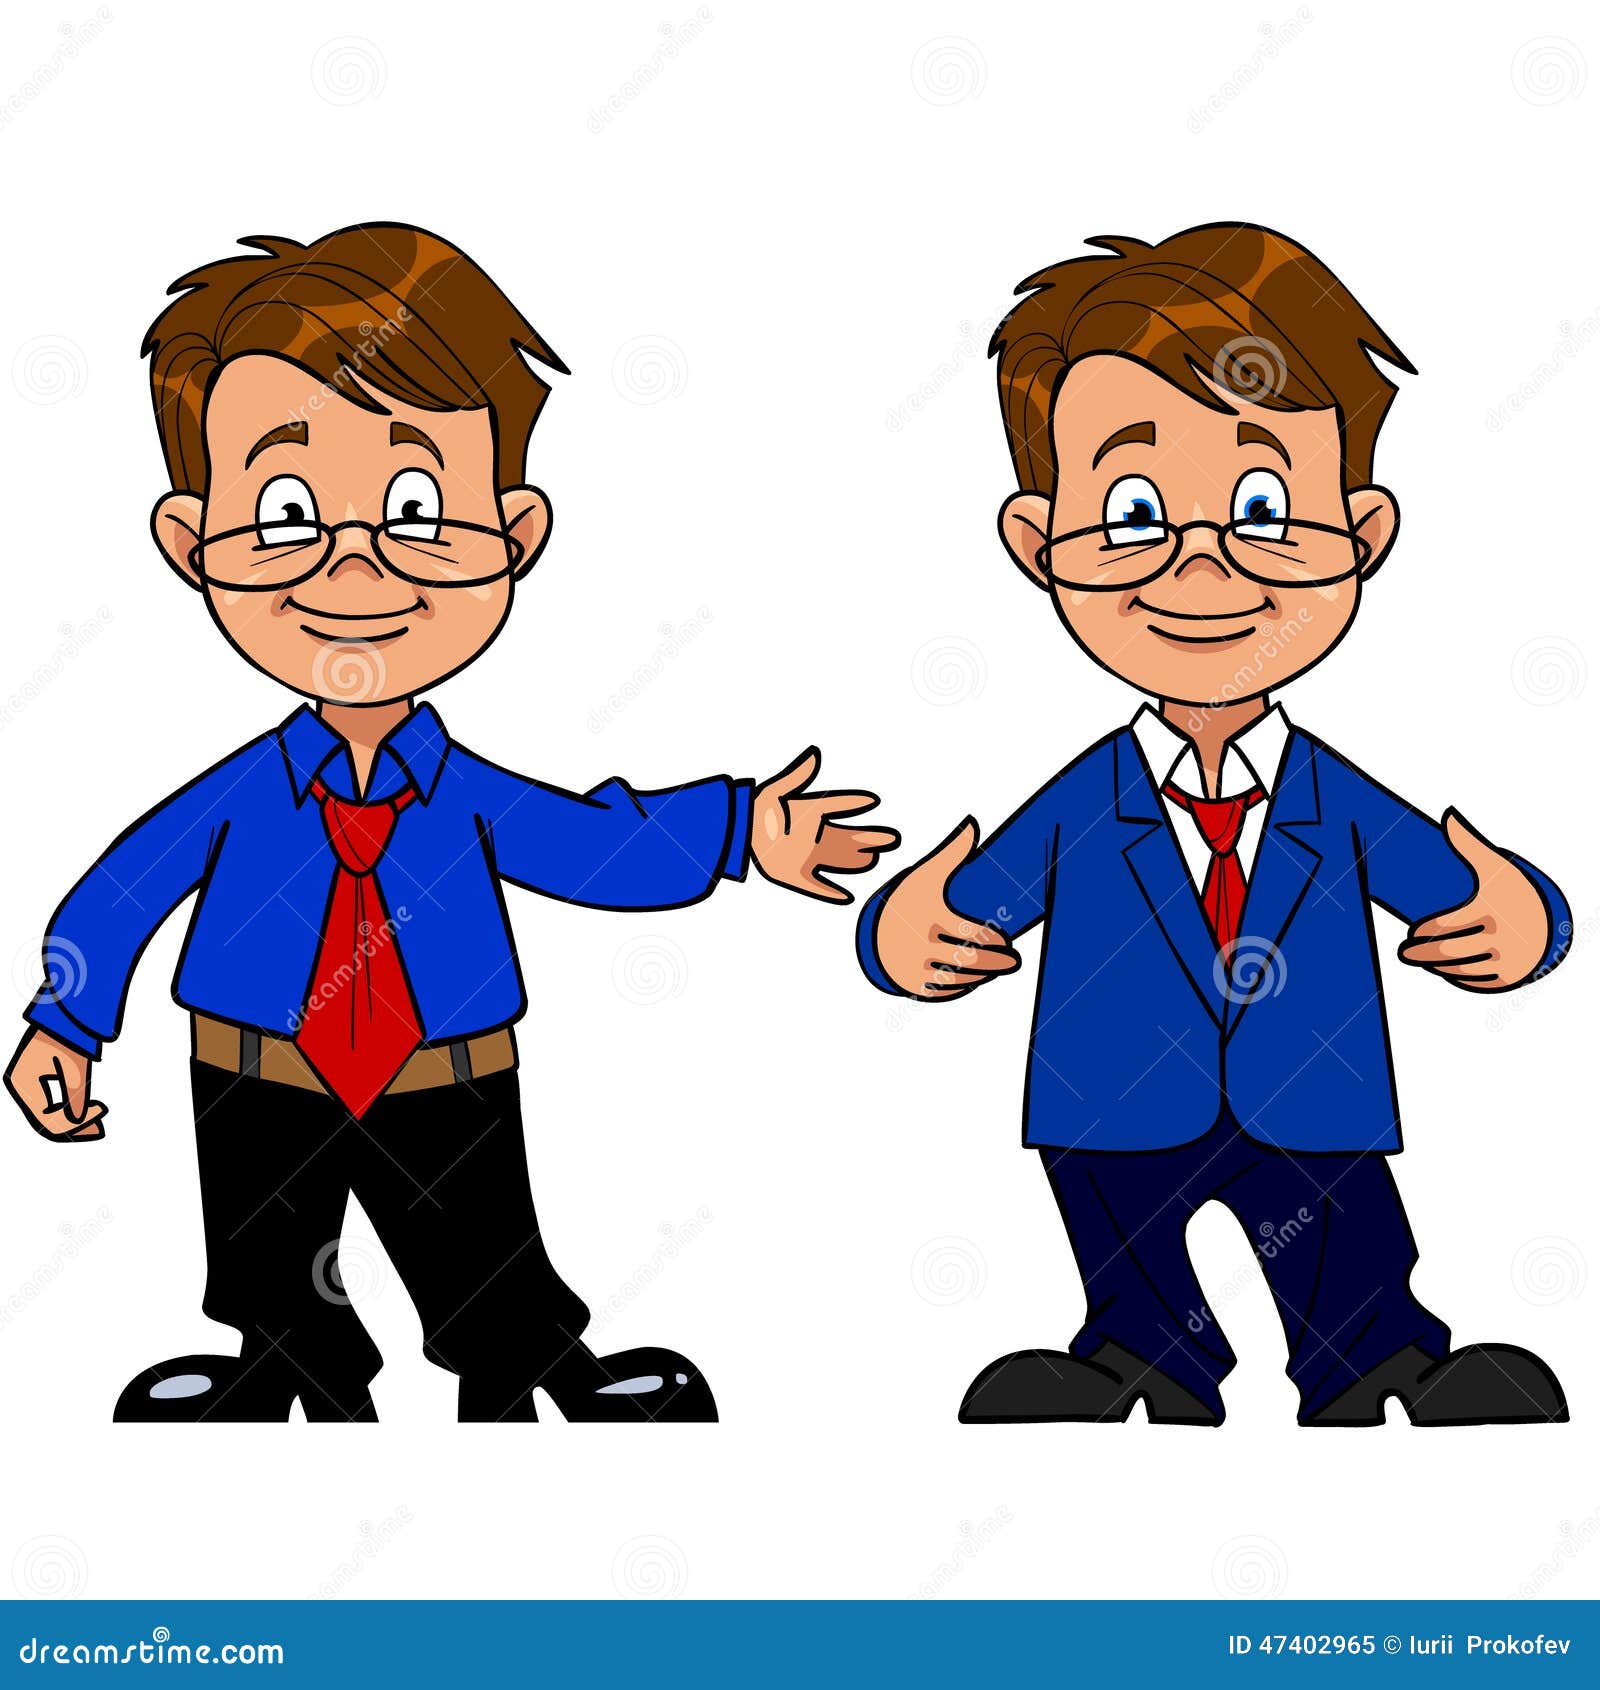 clipart man with glasses - photo #18